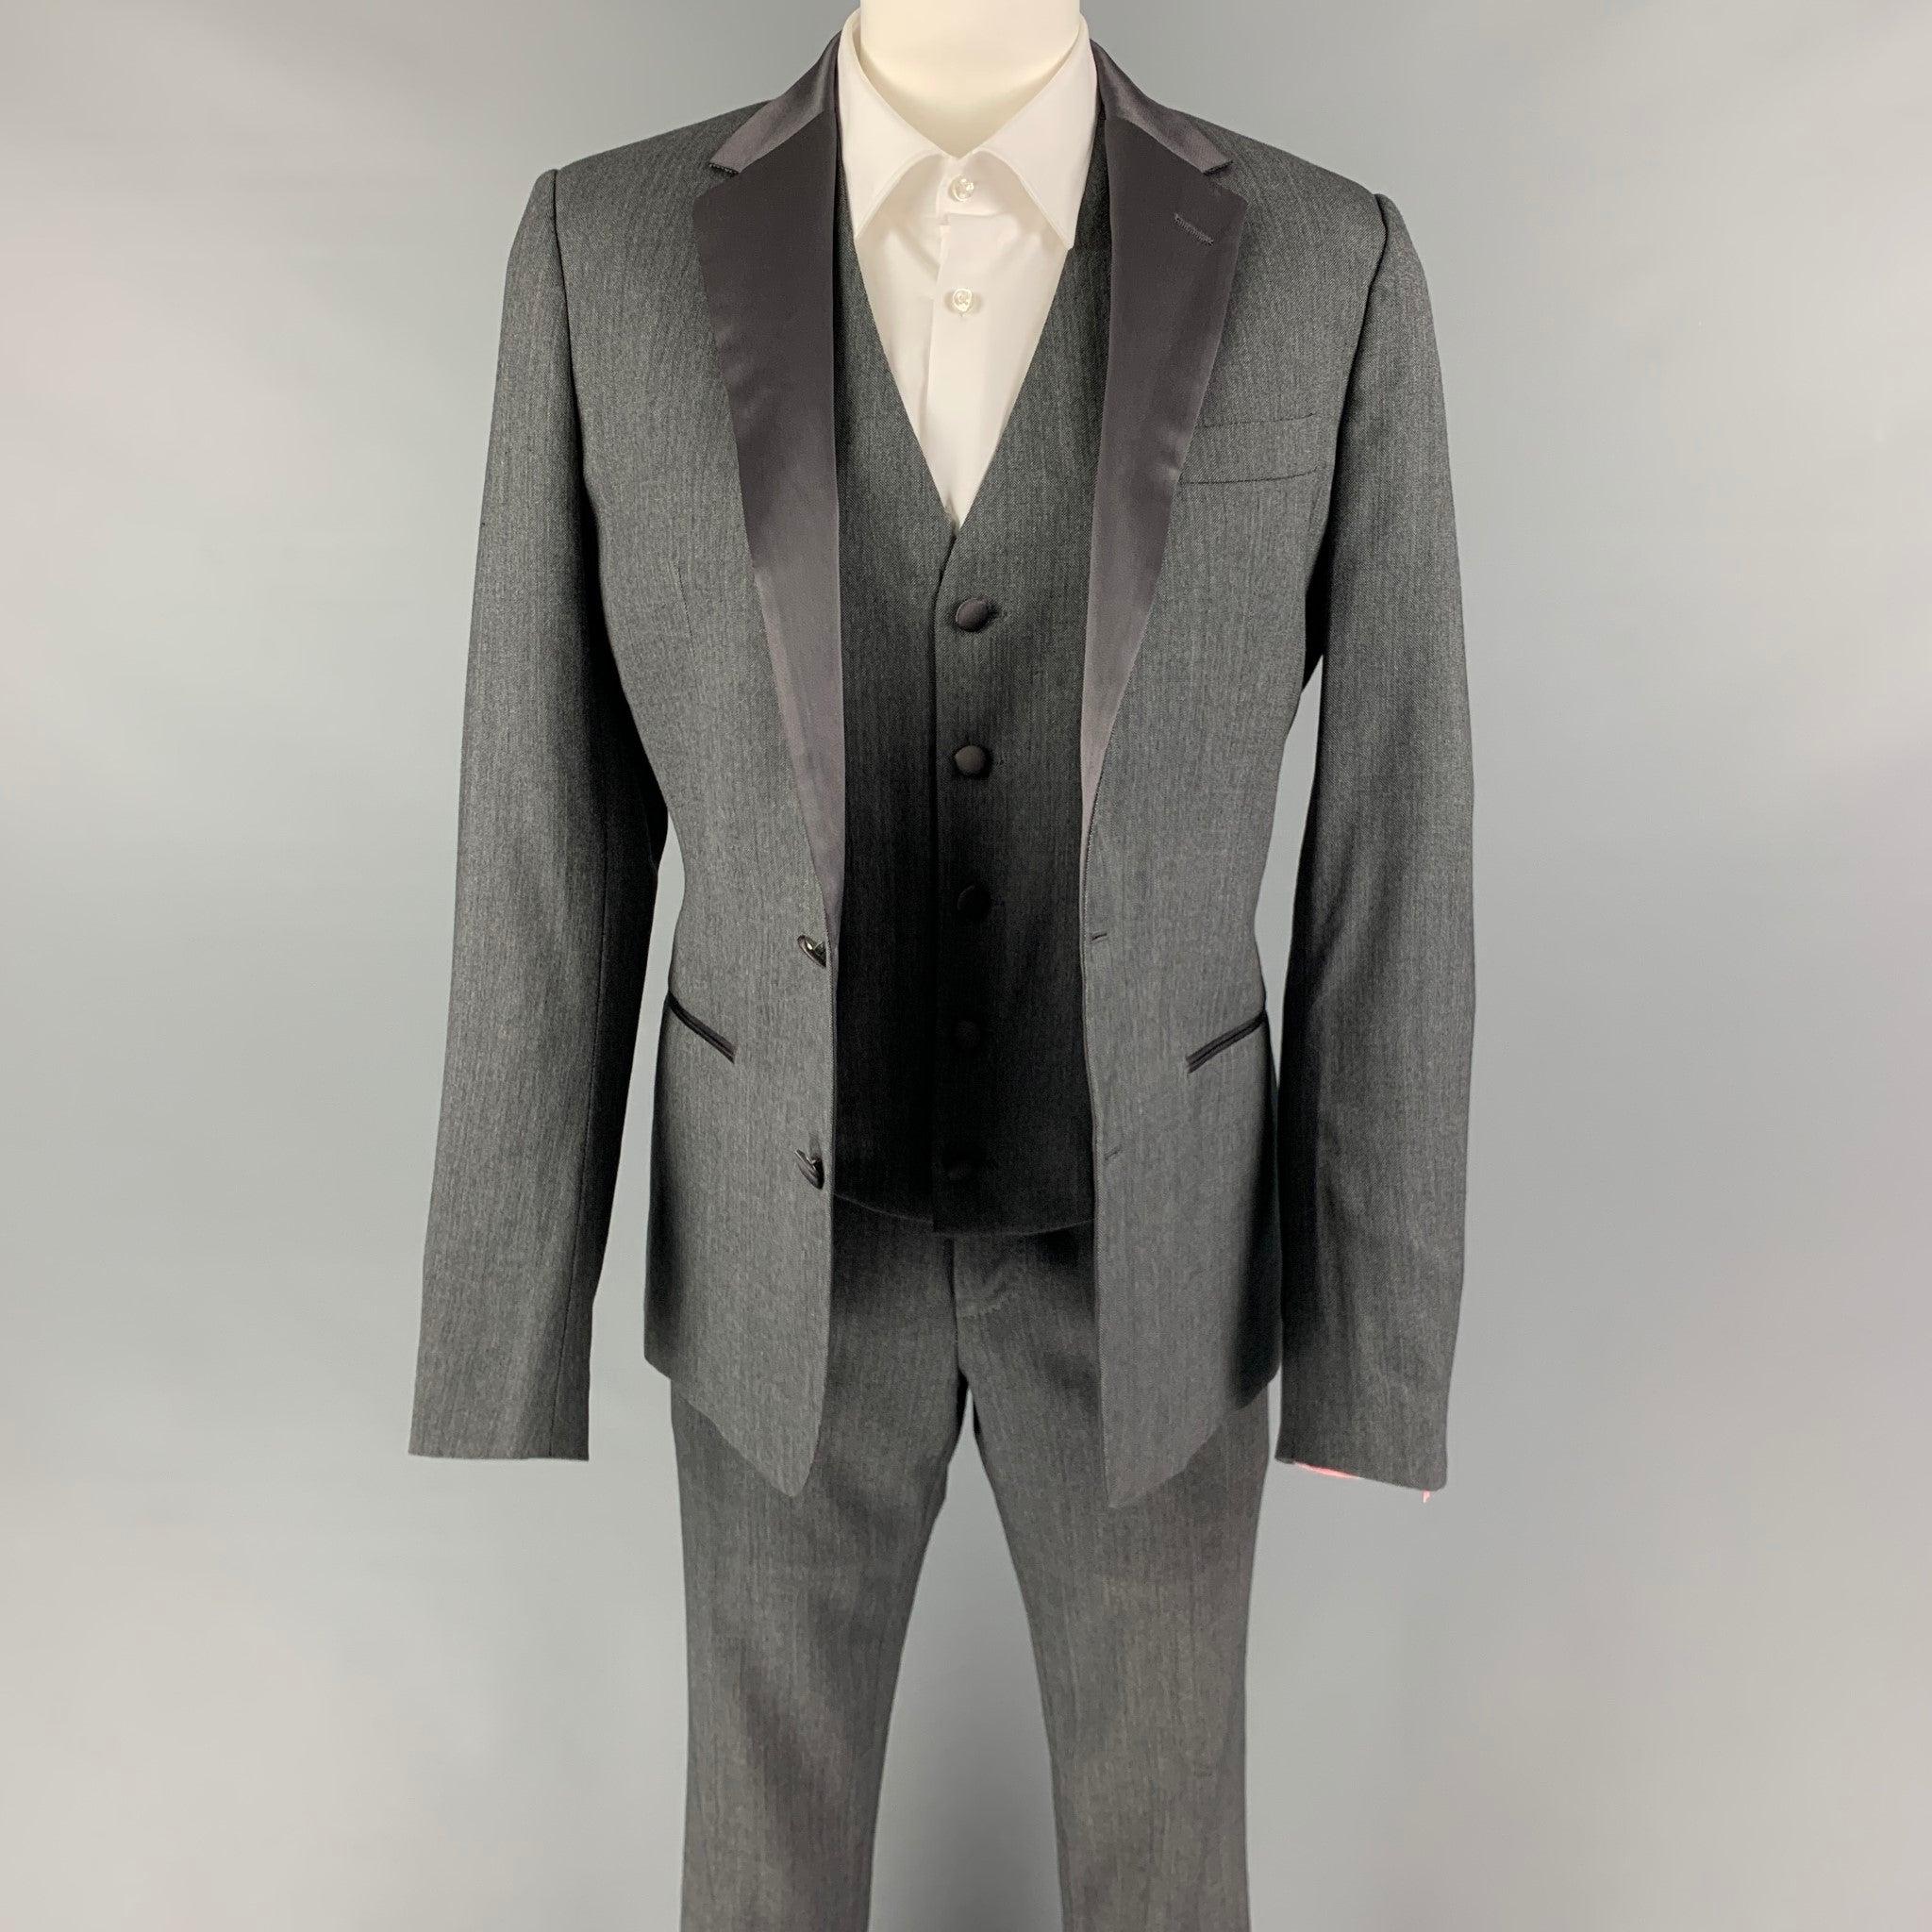 DOLCE & GABBANA
3 Piece suit comes in a grey wool / silk with a full liner and includes a single breasted, double button sport coat with a notch lapel and matching flat front trousers. Excellent Pre-Owned Condition. 

Marked:   46 

Measurements: 
 